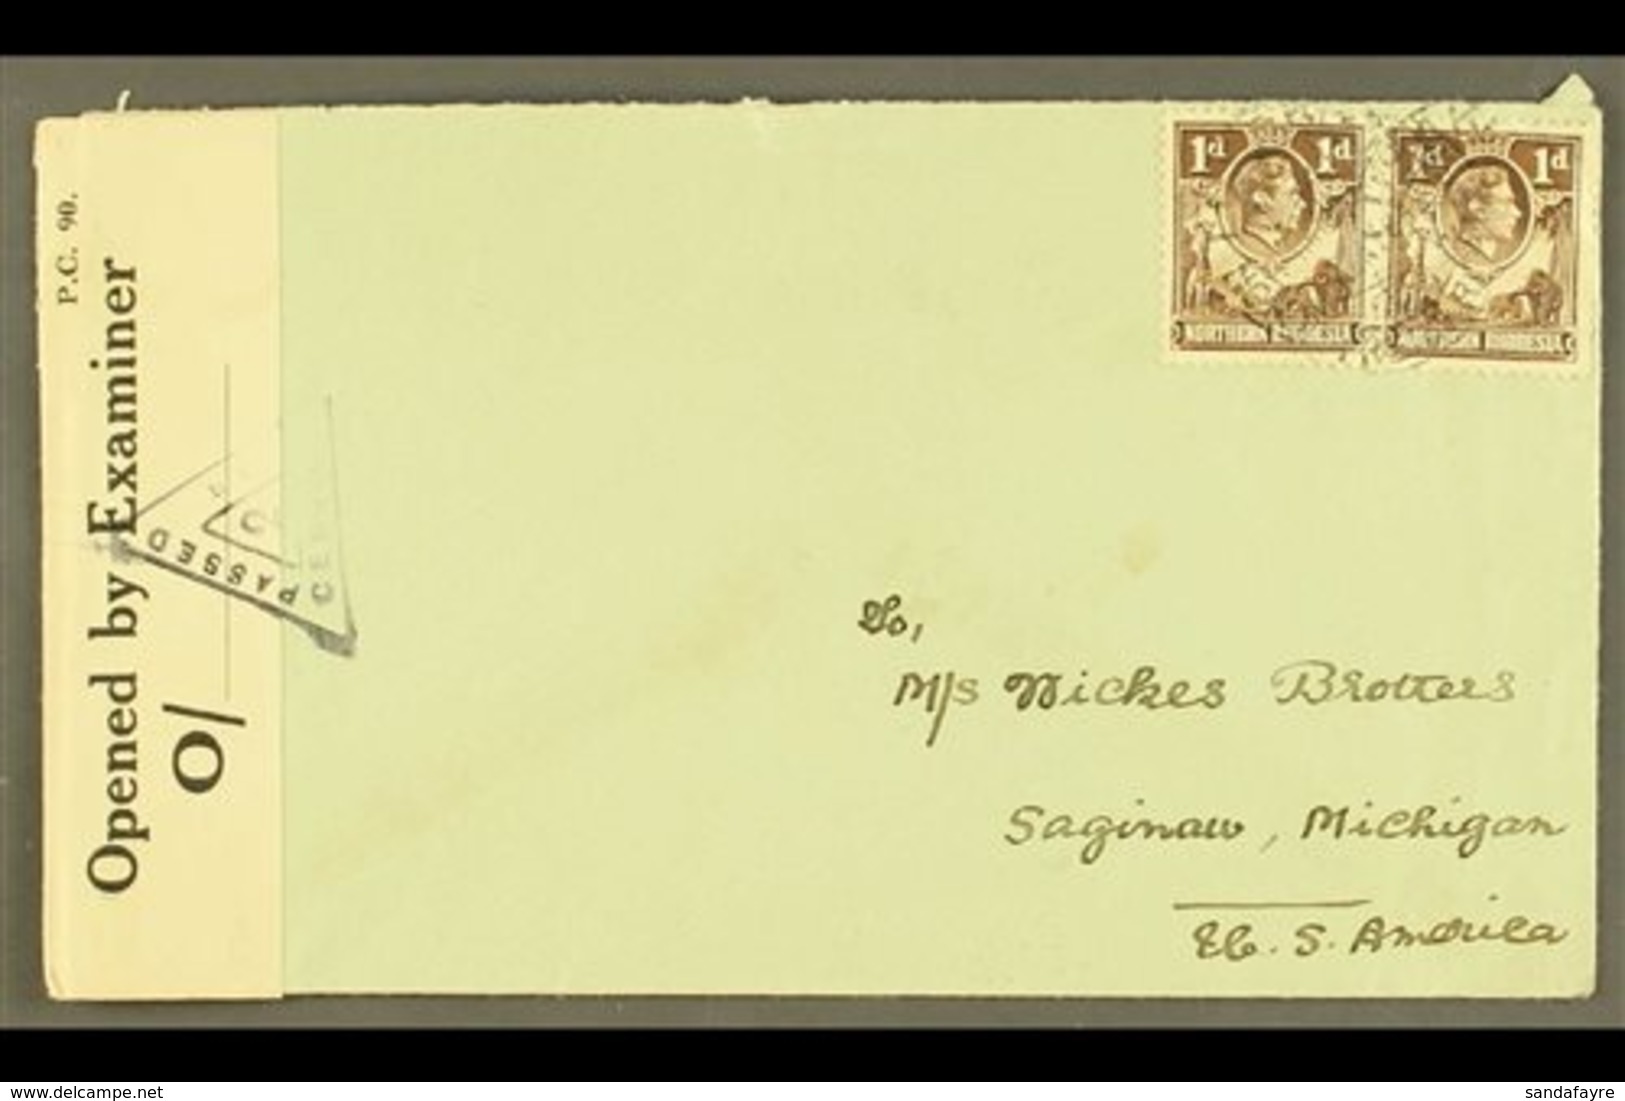 \Y 1942\Y (March) Envelope To USA, Bearing 1d Brown Pair, Tied Luasaka Cds's, And At Left Opened By Examiner Reseal Tape - Northern Rhodesia (...-1963)